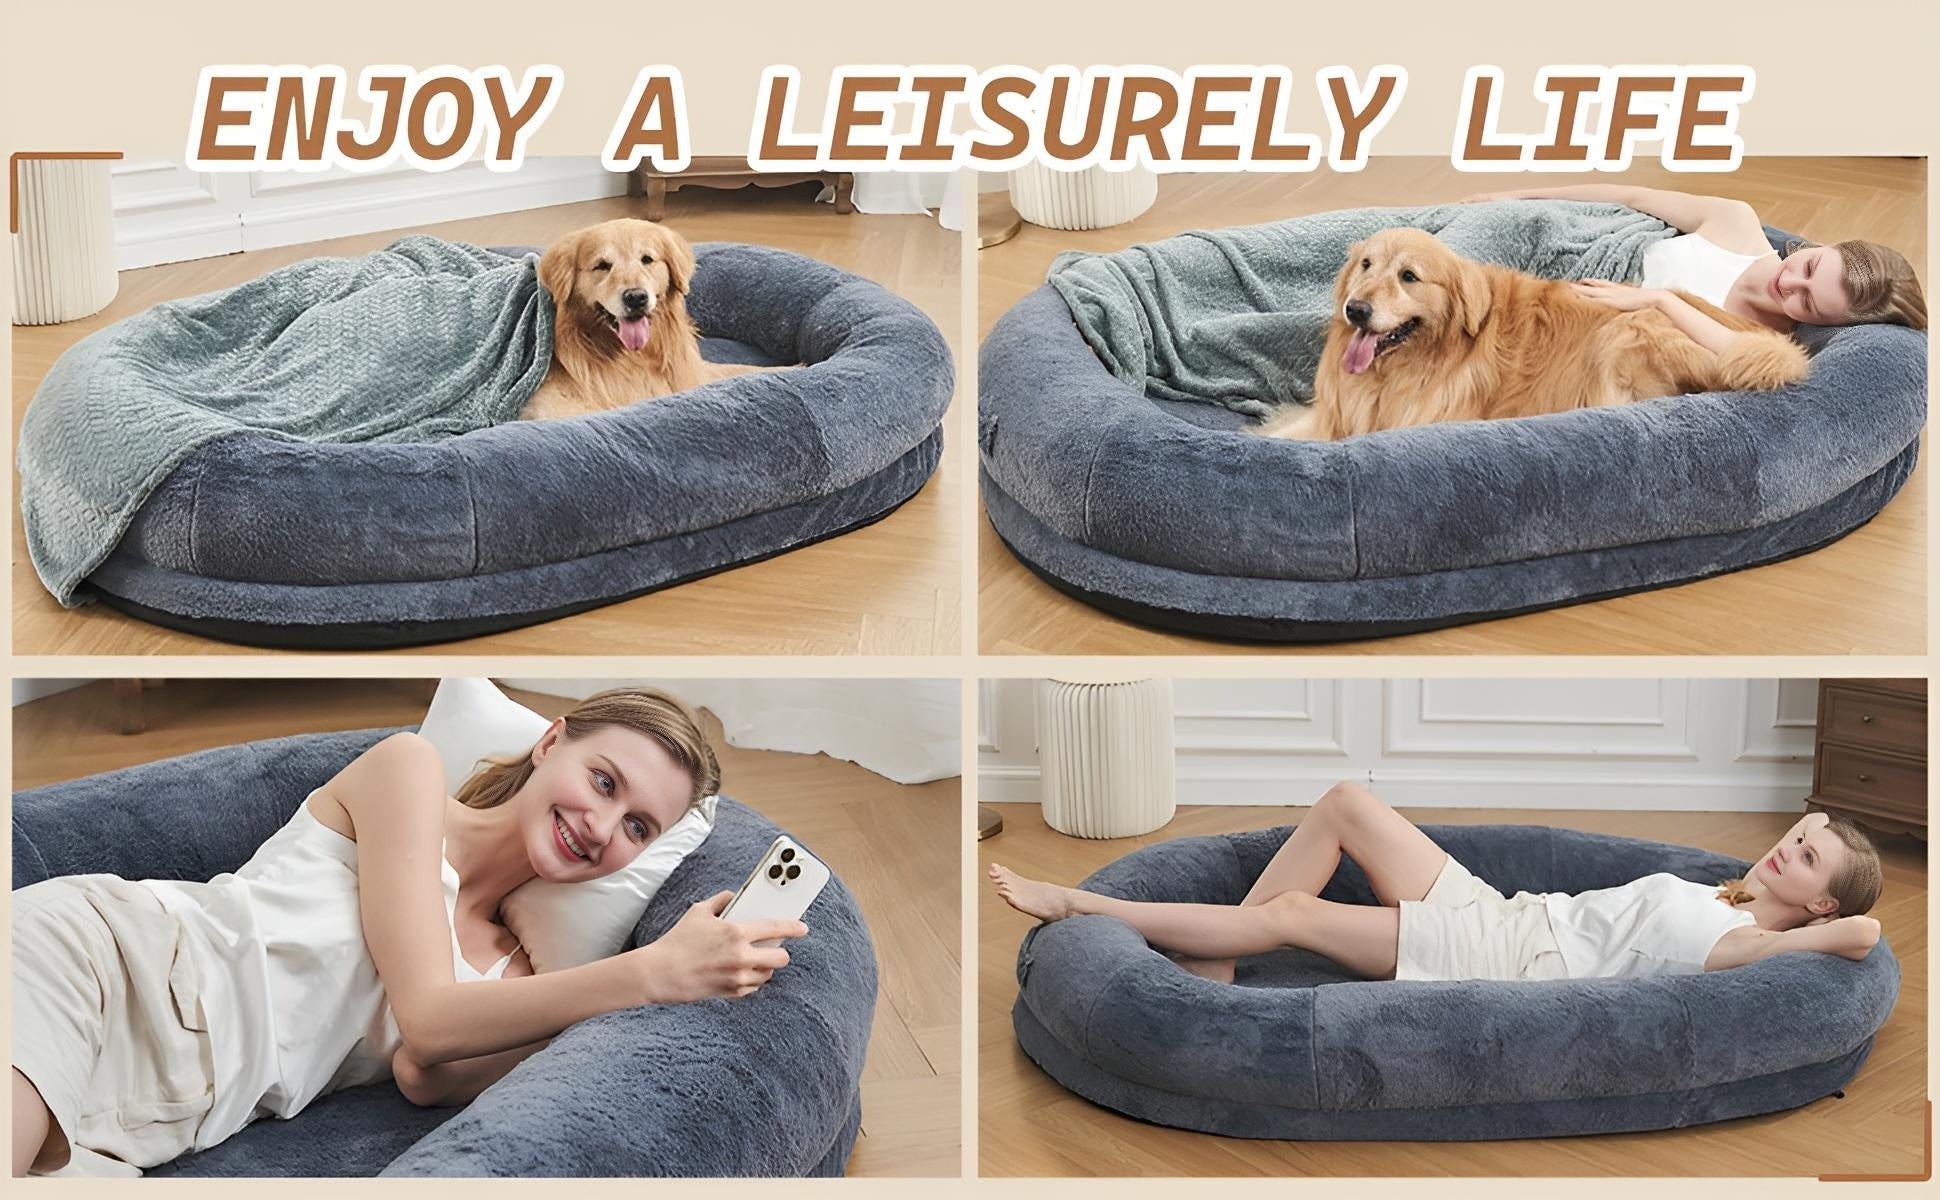 Enjoy a leisurely life with a giant Dog Bed for Humans with a blanket.